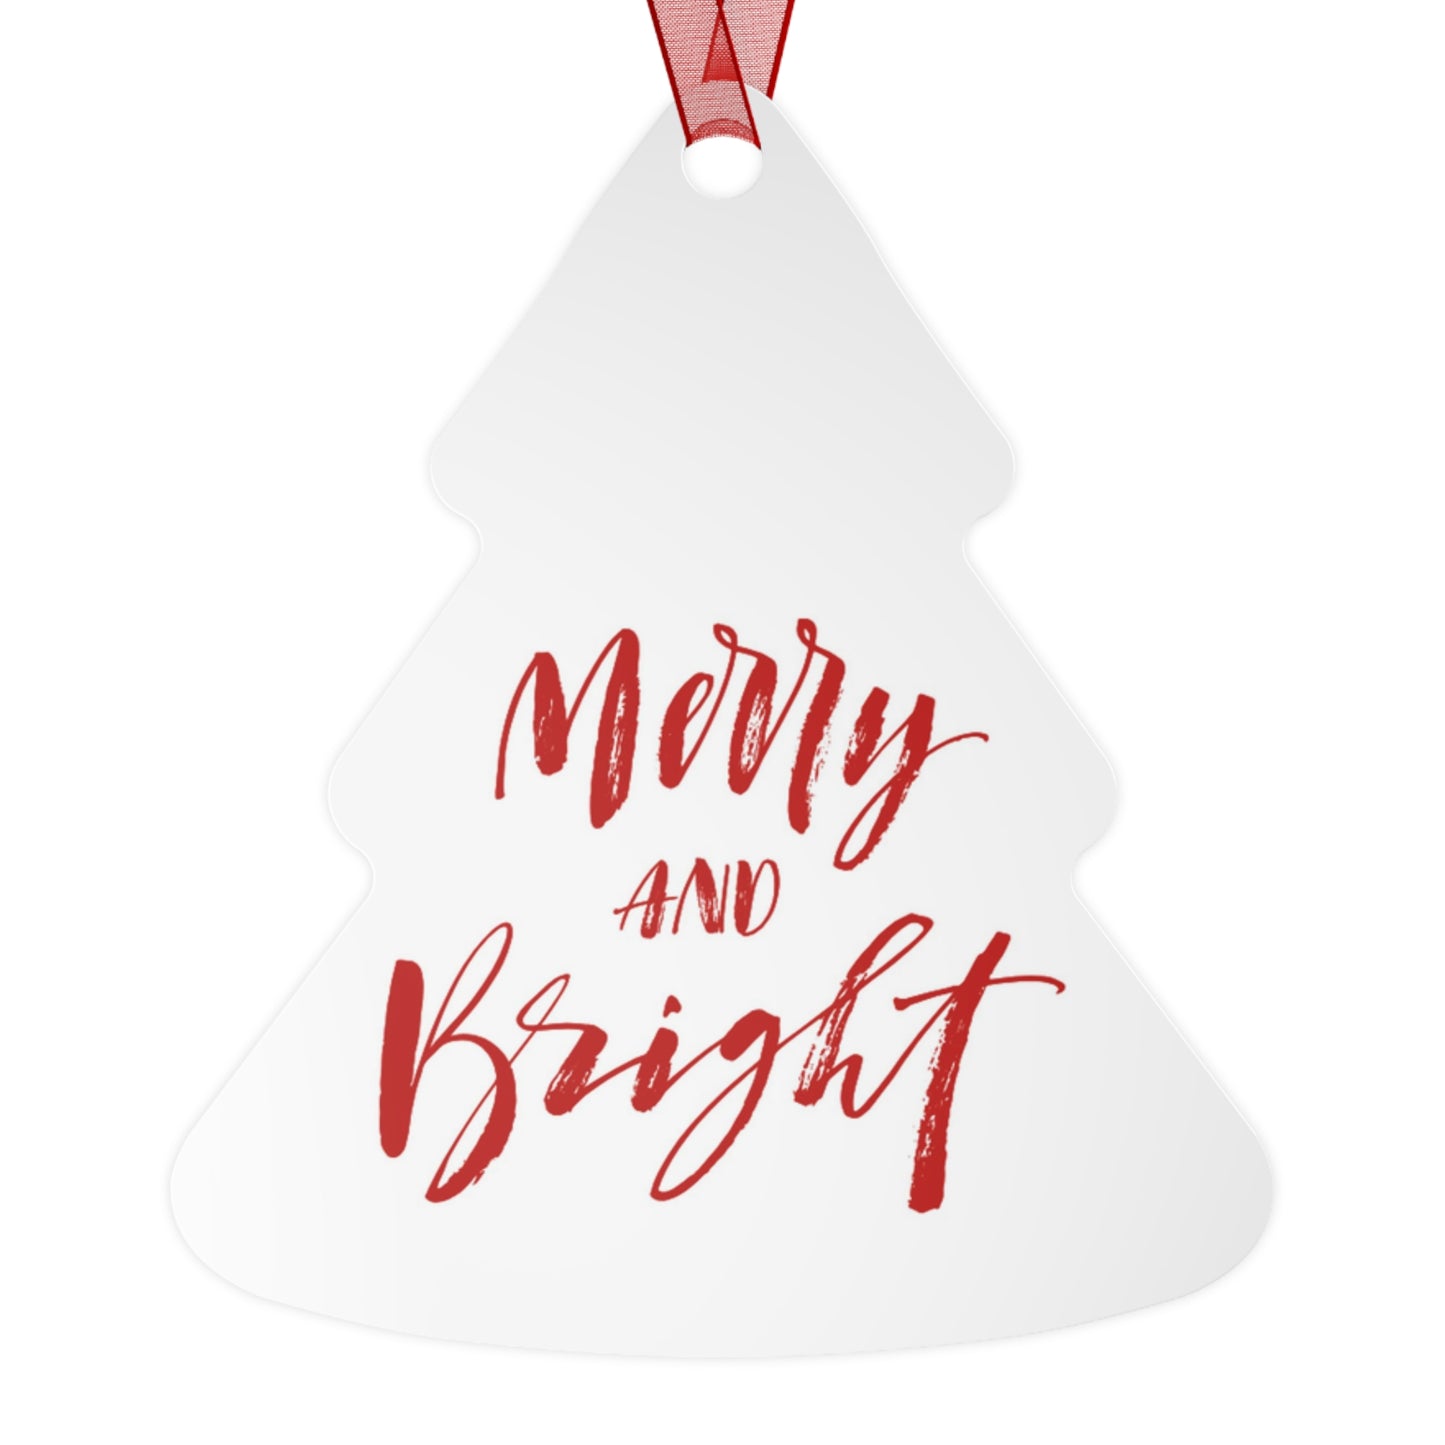 Tree-Shaped Holiday Ornament: 1 piece; Metal; Red ribbon